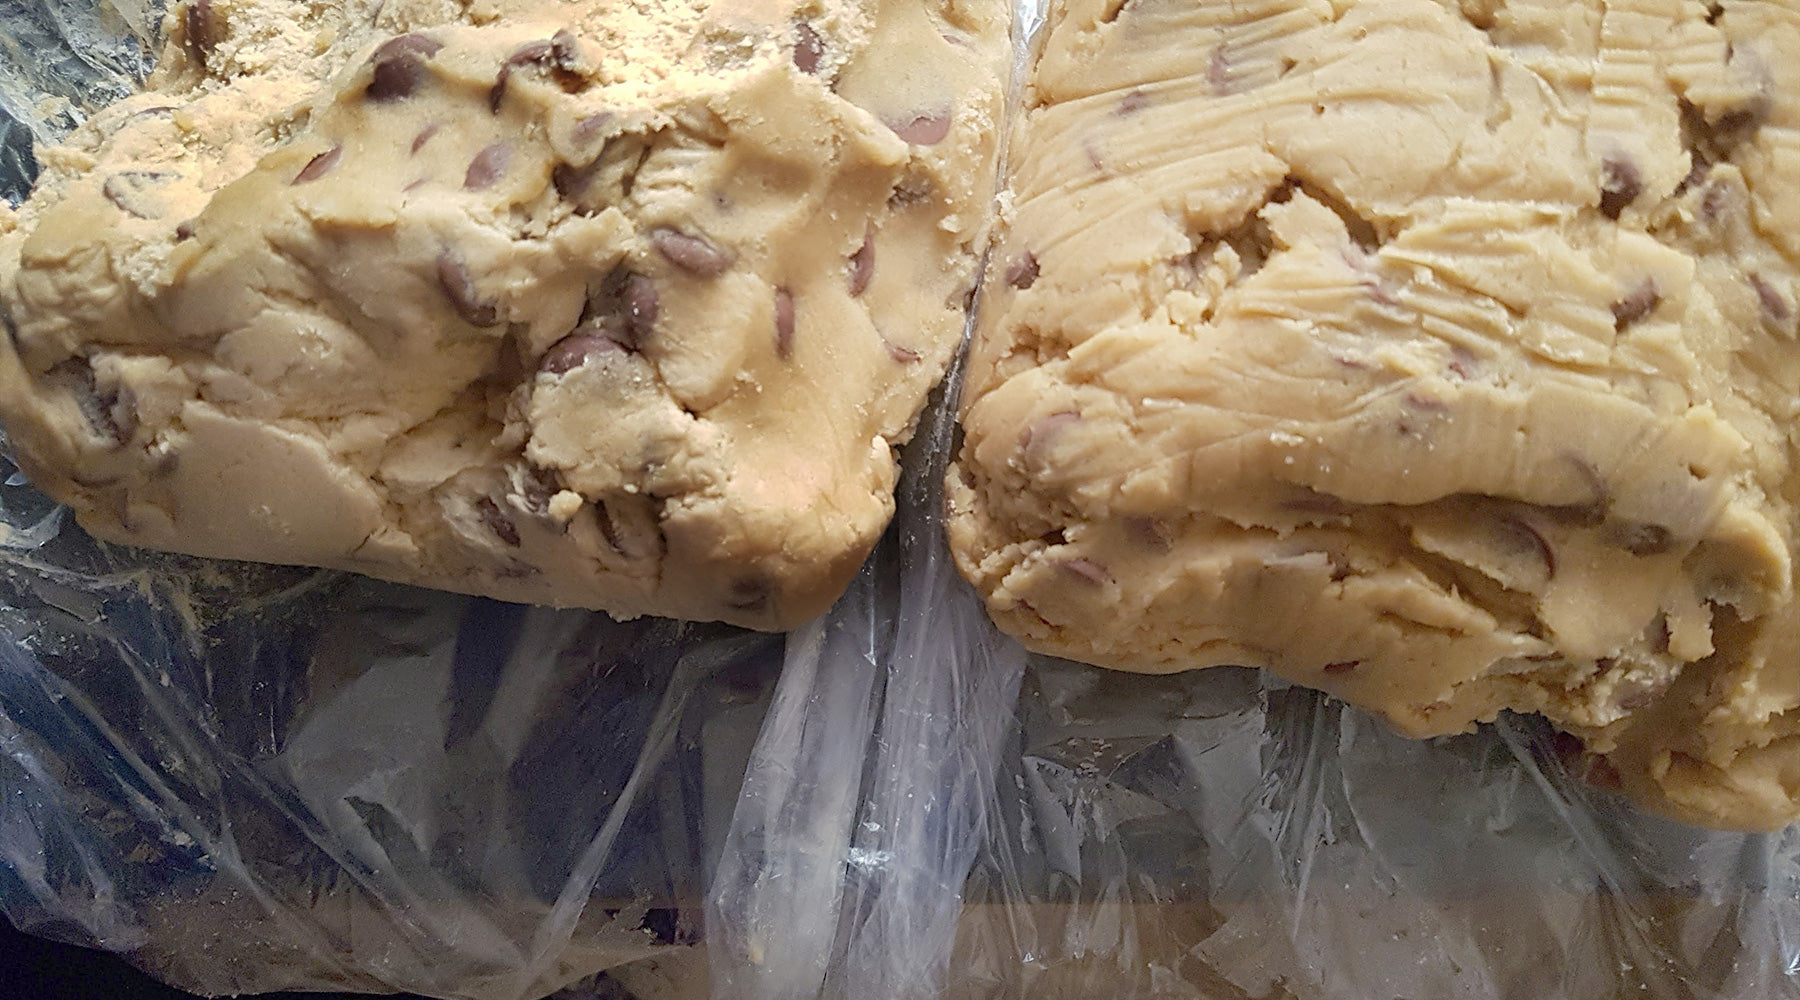 Two batches of chocolate chip cookie dough wrapped in plastic